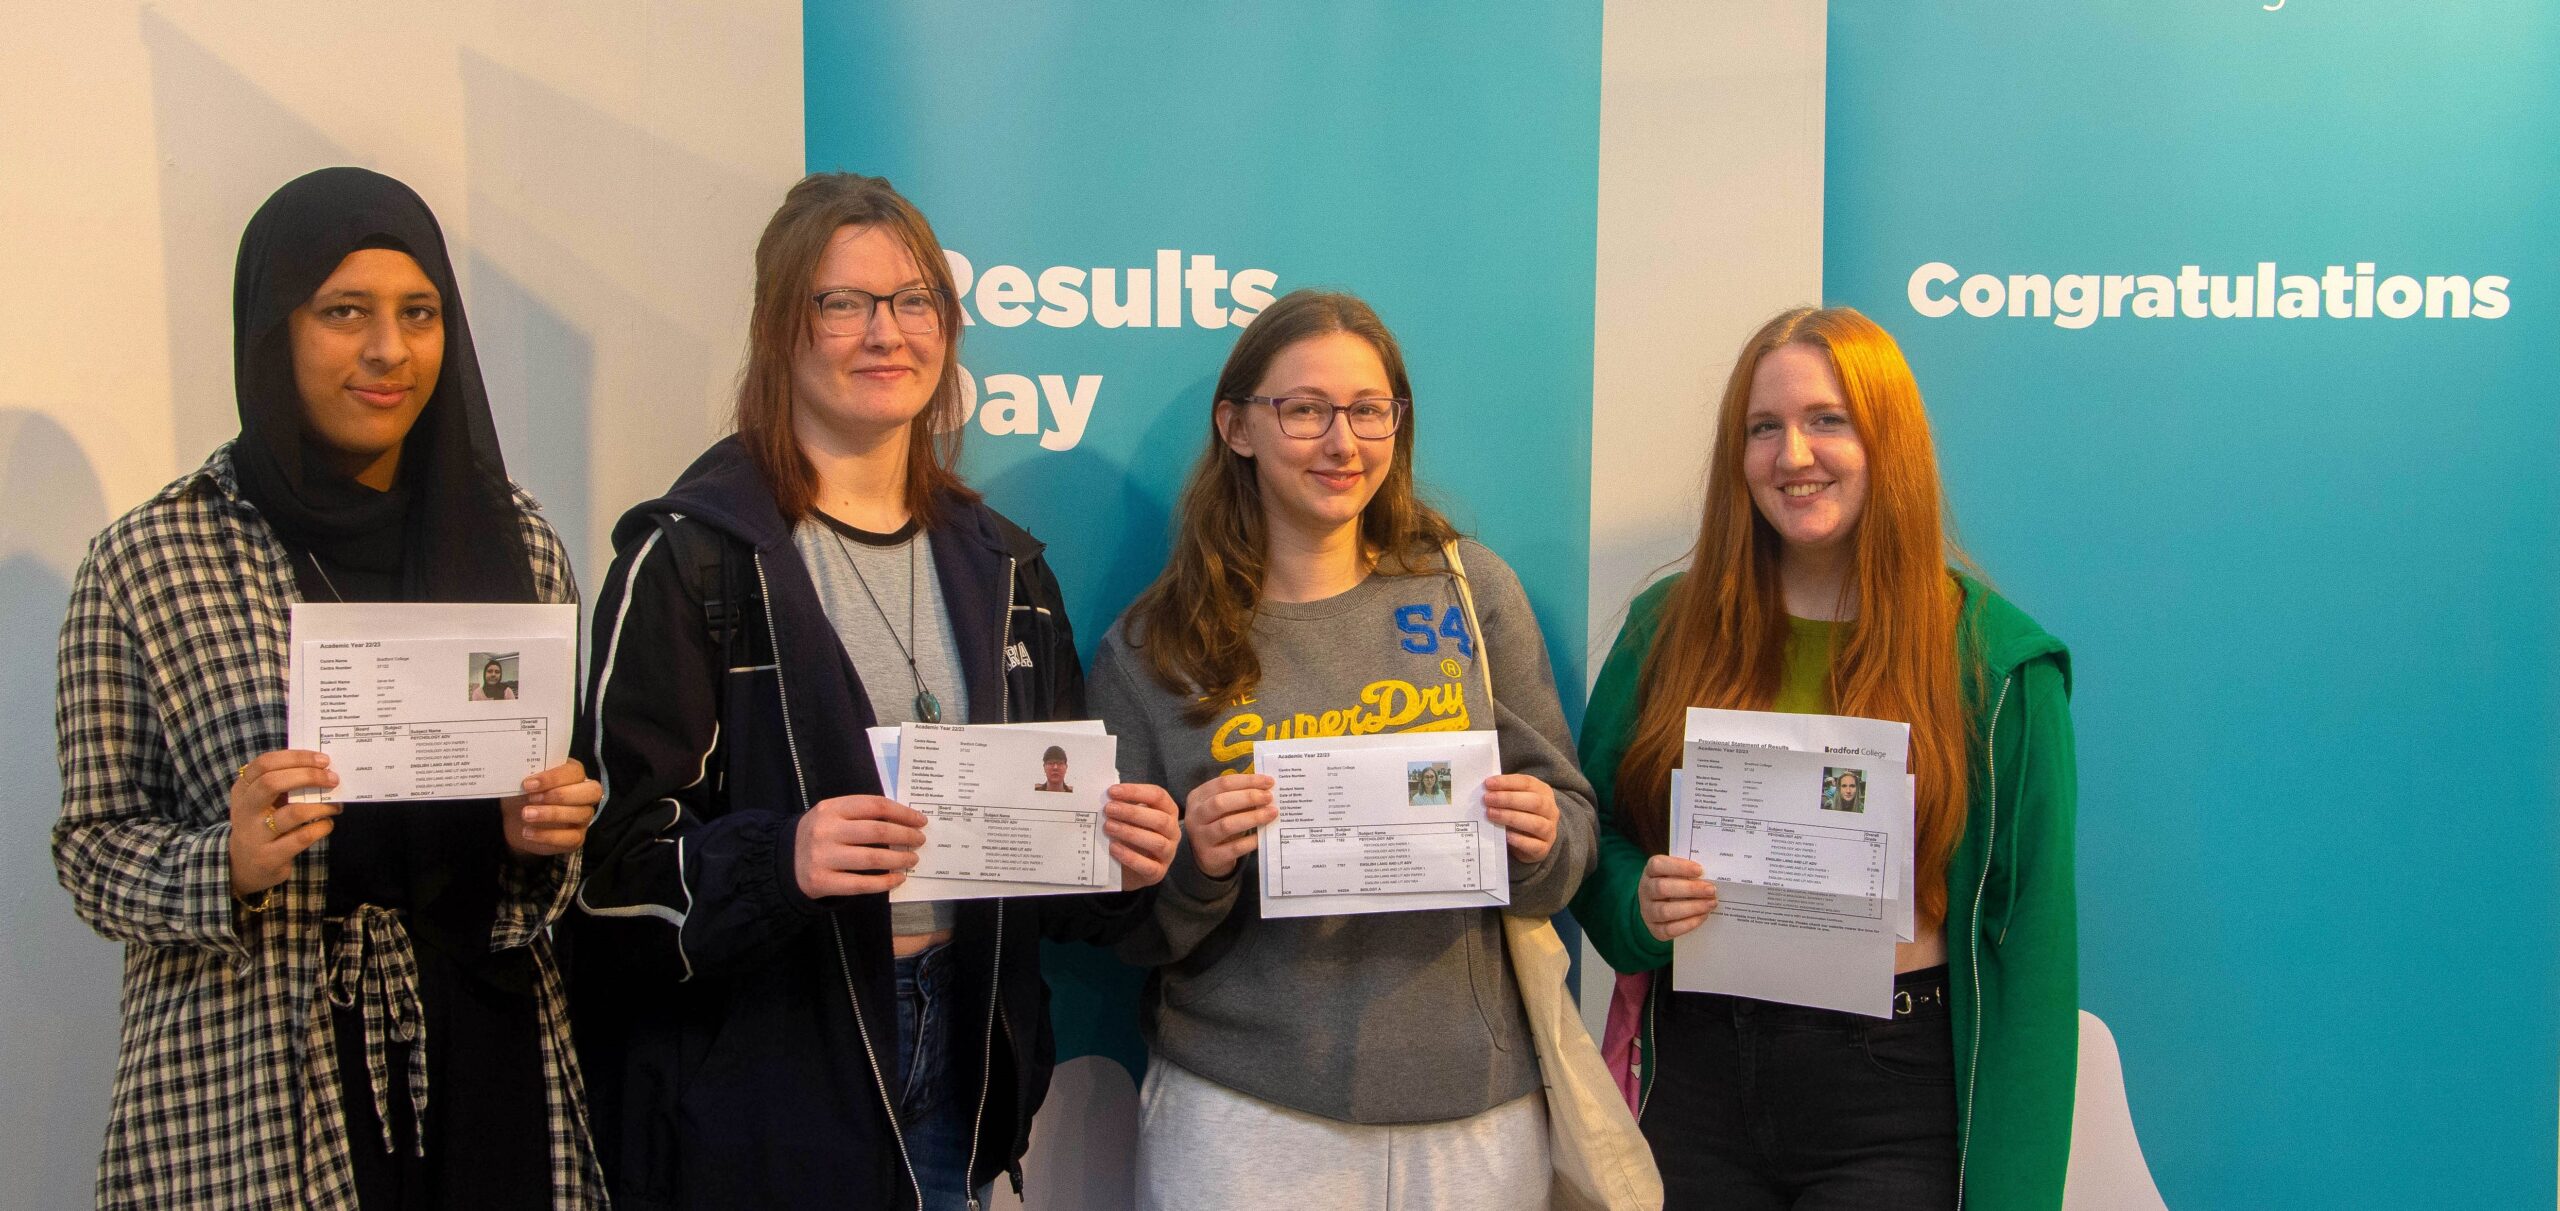 Science and Arts Top Bradford College Results Day